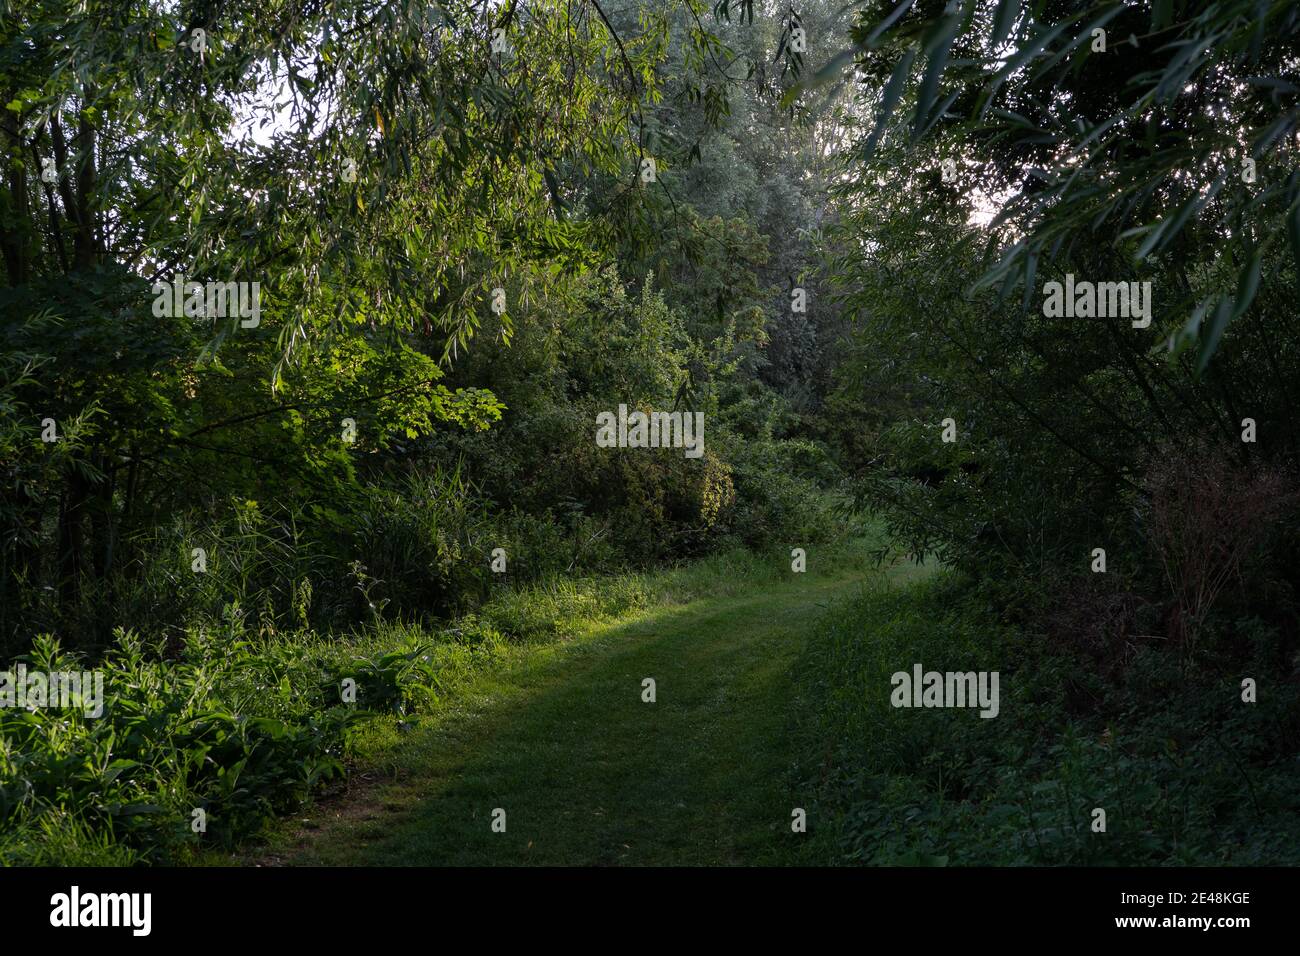 Grassy path between row of trees and shrubs lit by summer dusk sunlight with magical atmosphere Stock Photo